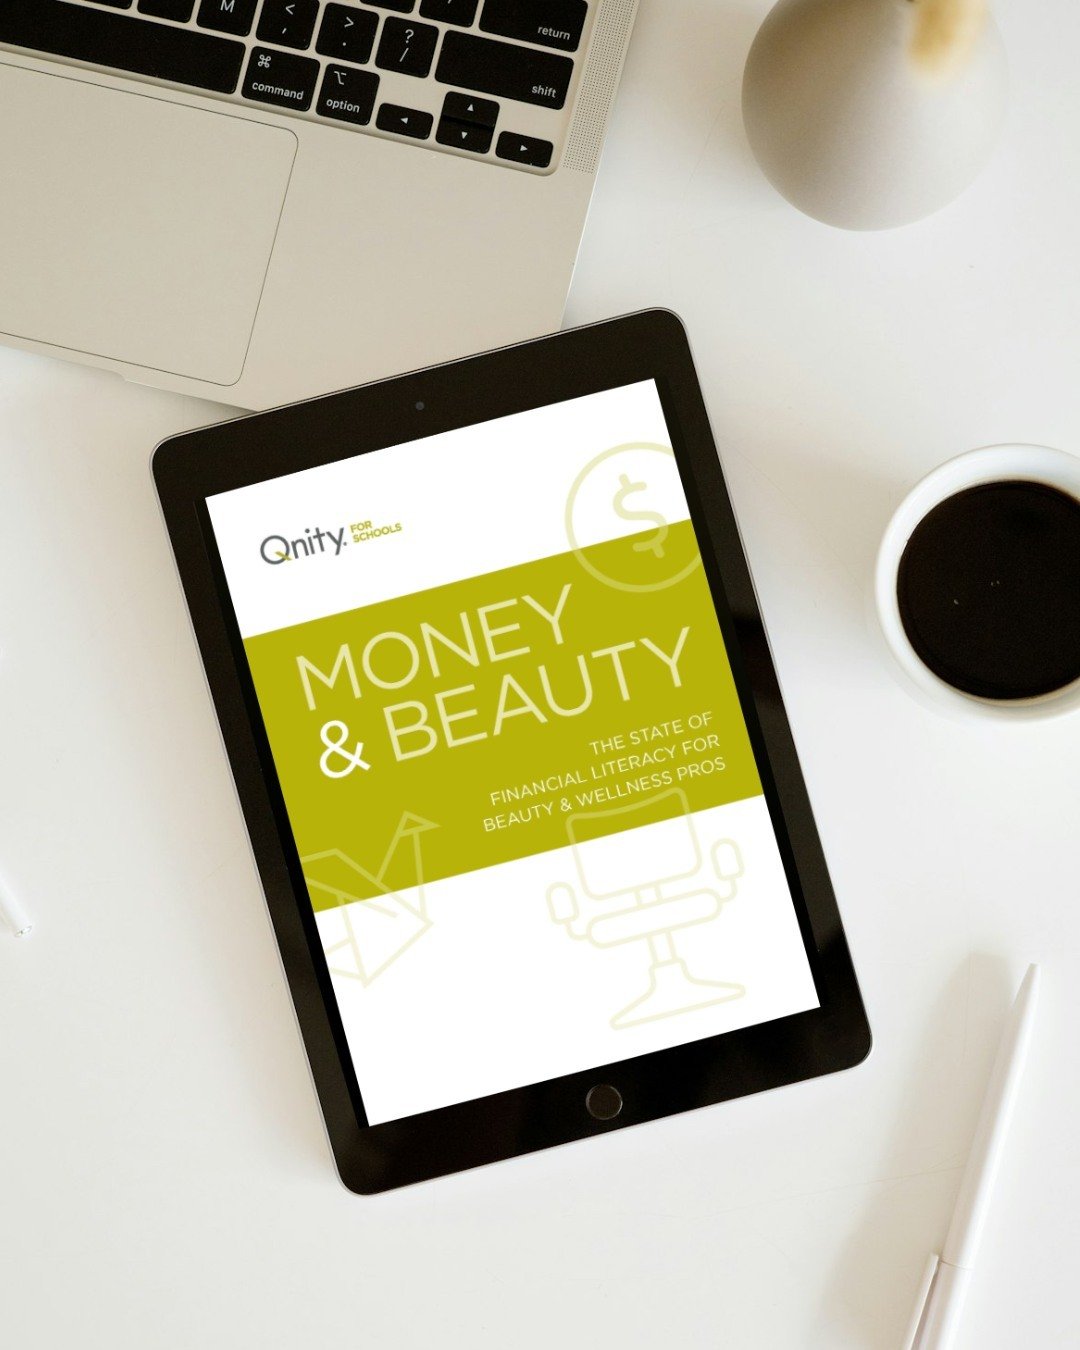 Money + Beauty 💚

Have you downloaded our FREE Financial Literacy White Paper yet?

The data surveys over 5000 students enrolled in cosmetology and esthetic programs across 150+ campuses in North America, compared with 1000 responses from profession